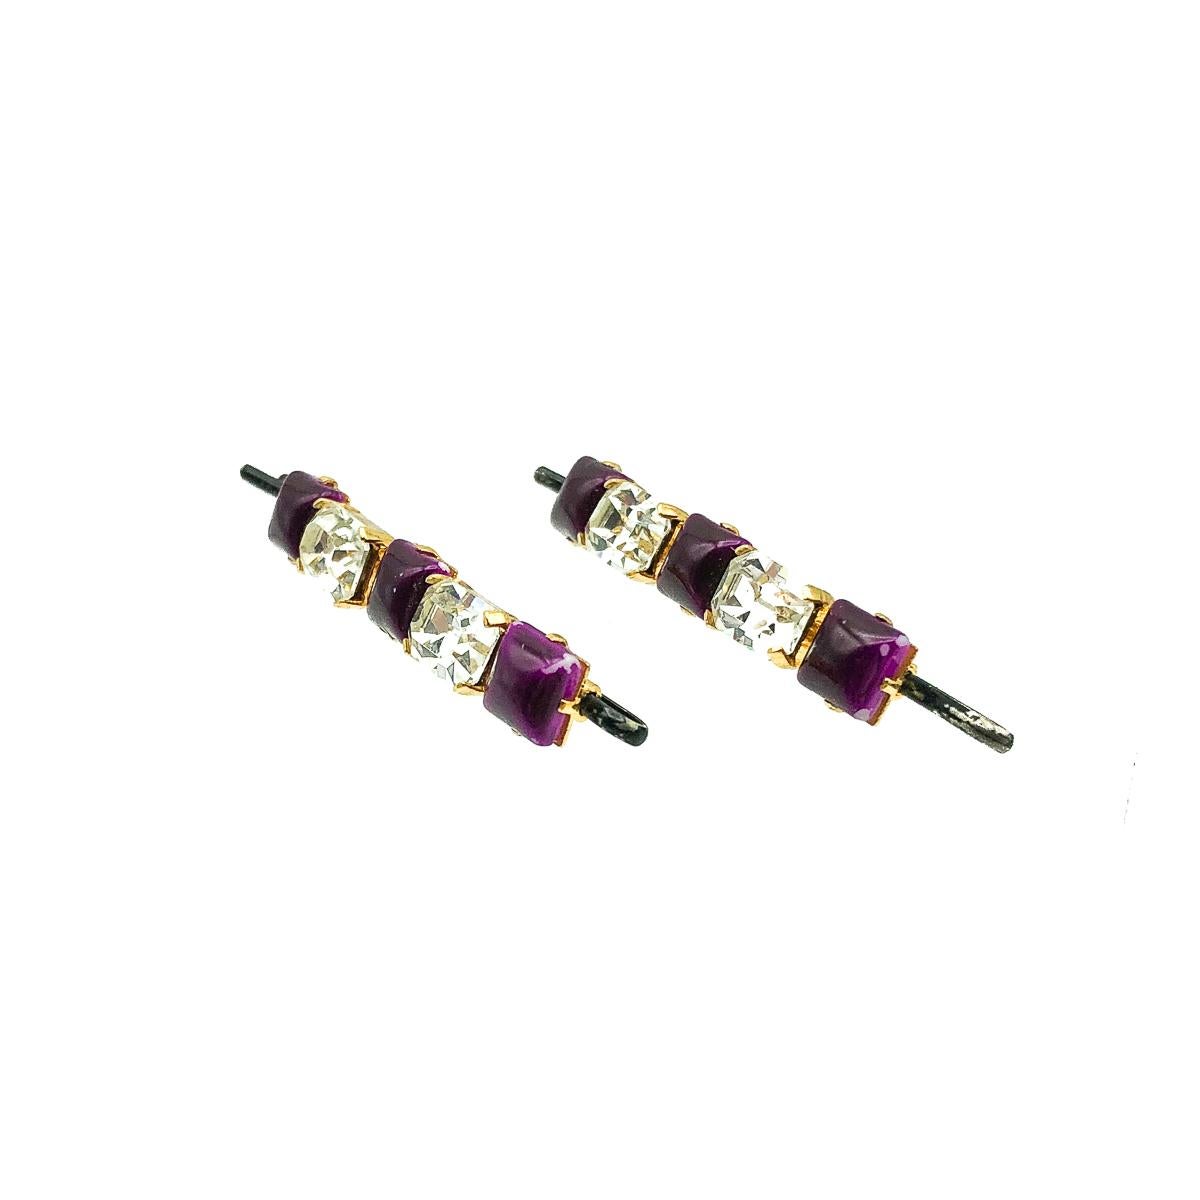 A pair of Vintage Crystal Hair Slides. Featuring a five stone row of claw set, emerald cut crystals which sparkle adorably alongside painted purple glass squares. Crafted in rich gold plated metal with a traditional hair grip attached through a long